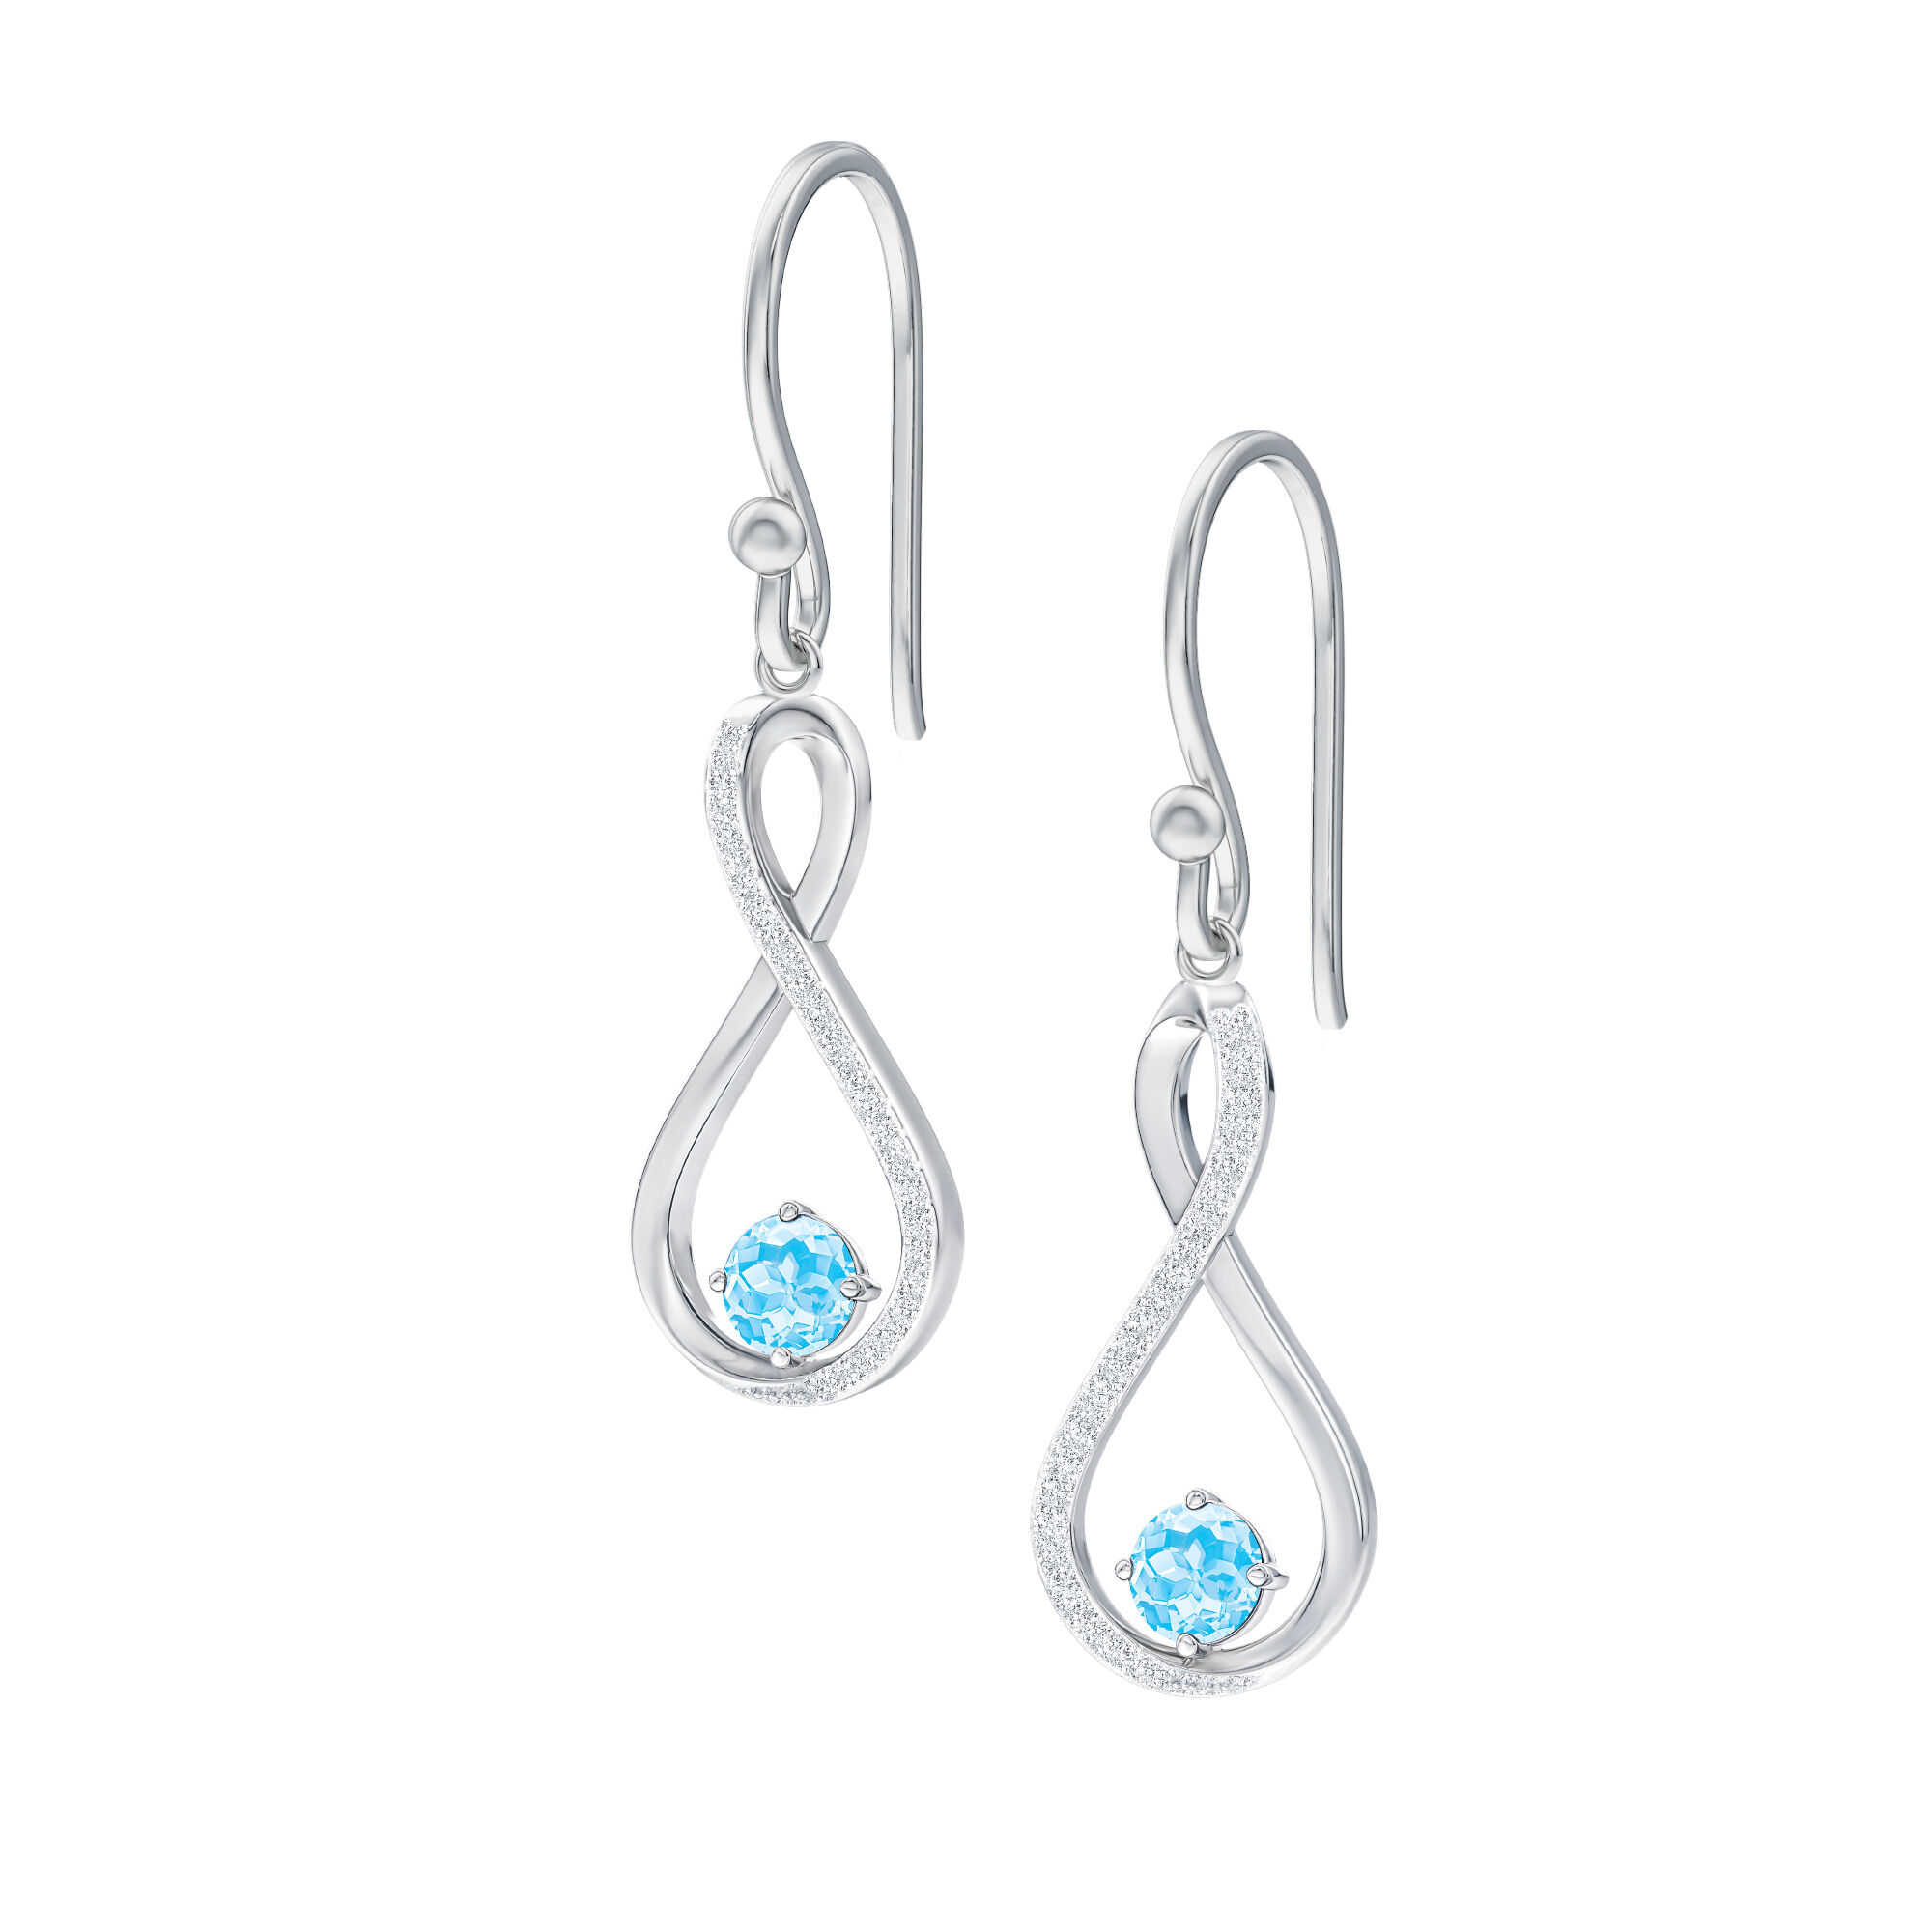 Birthstone and Diamond Earrings 5200 0056 c march